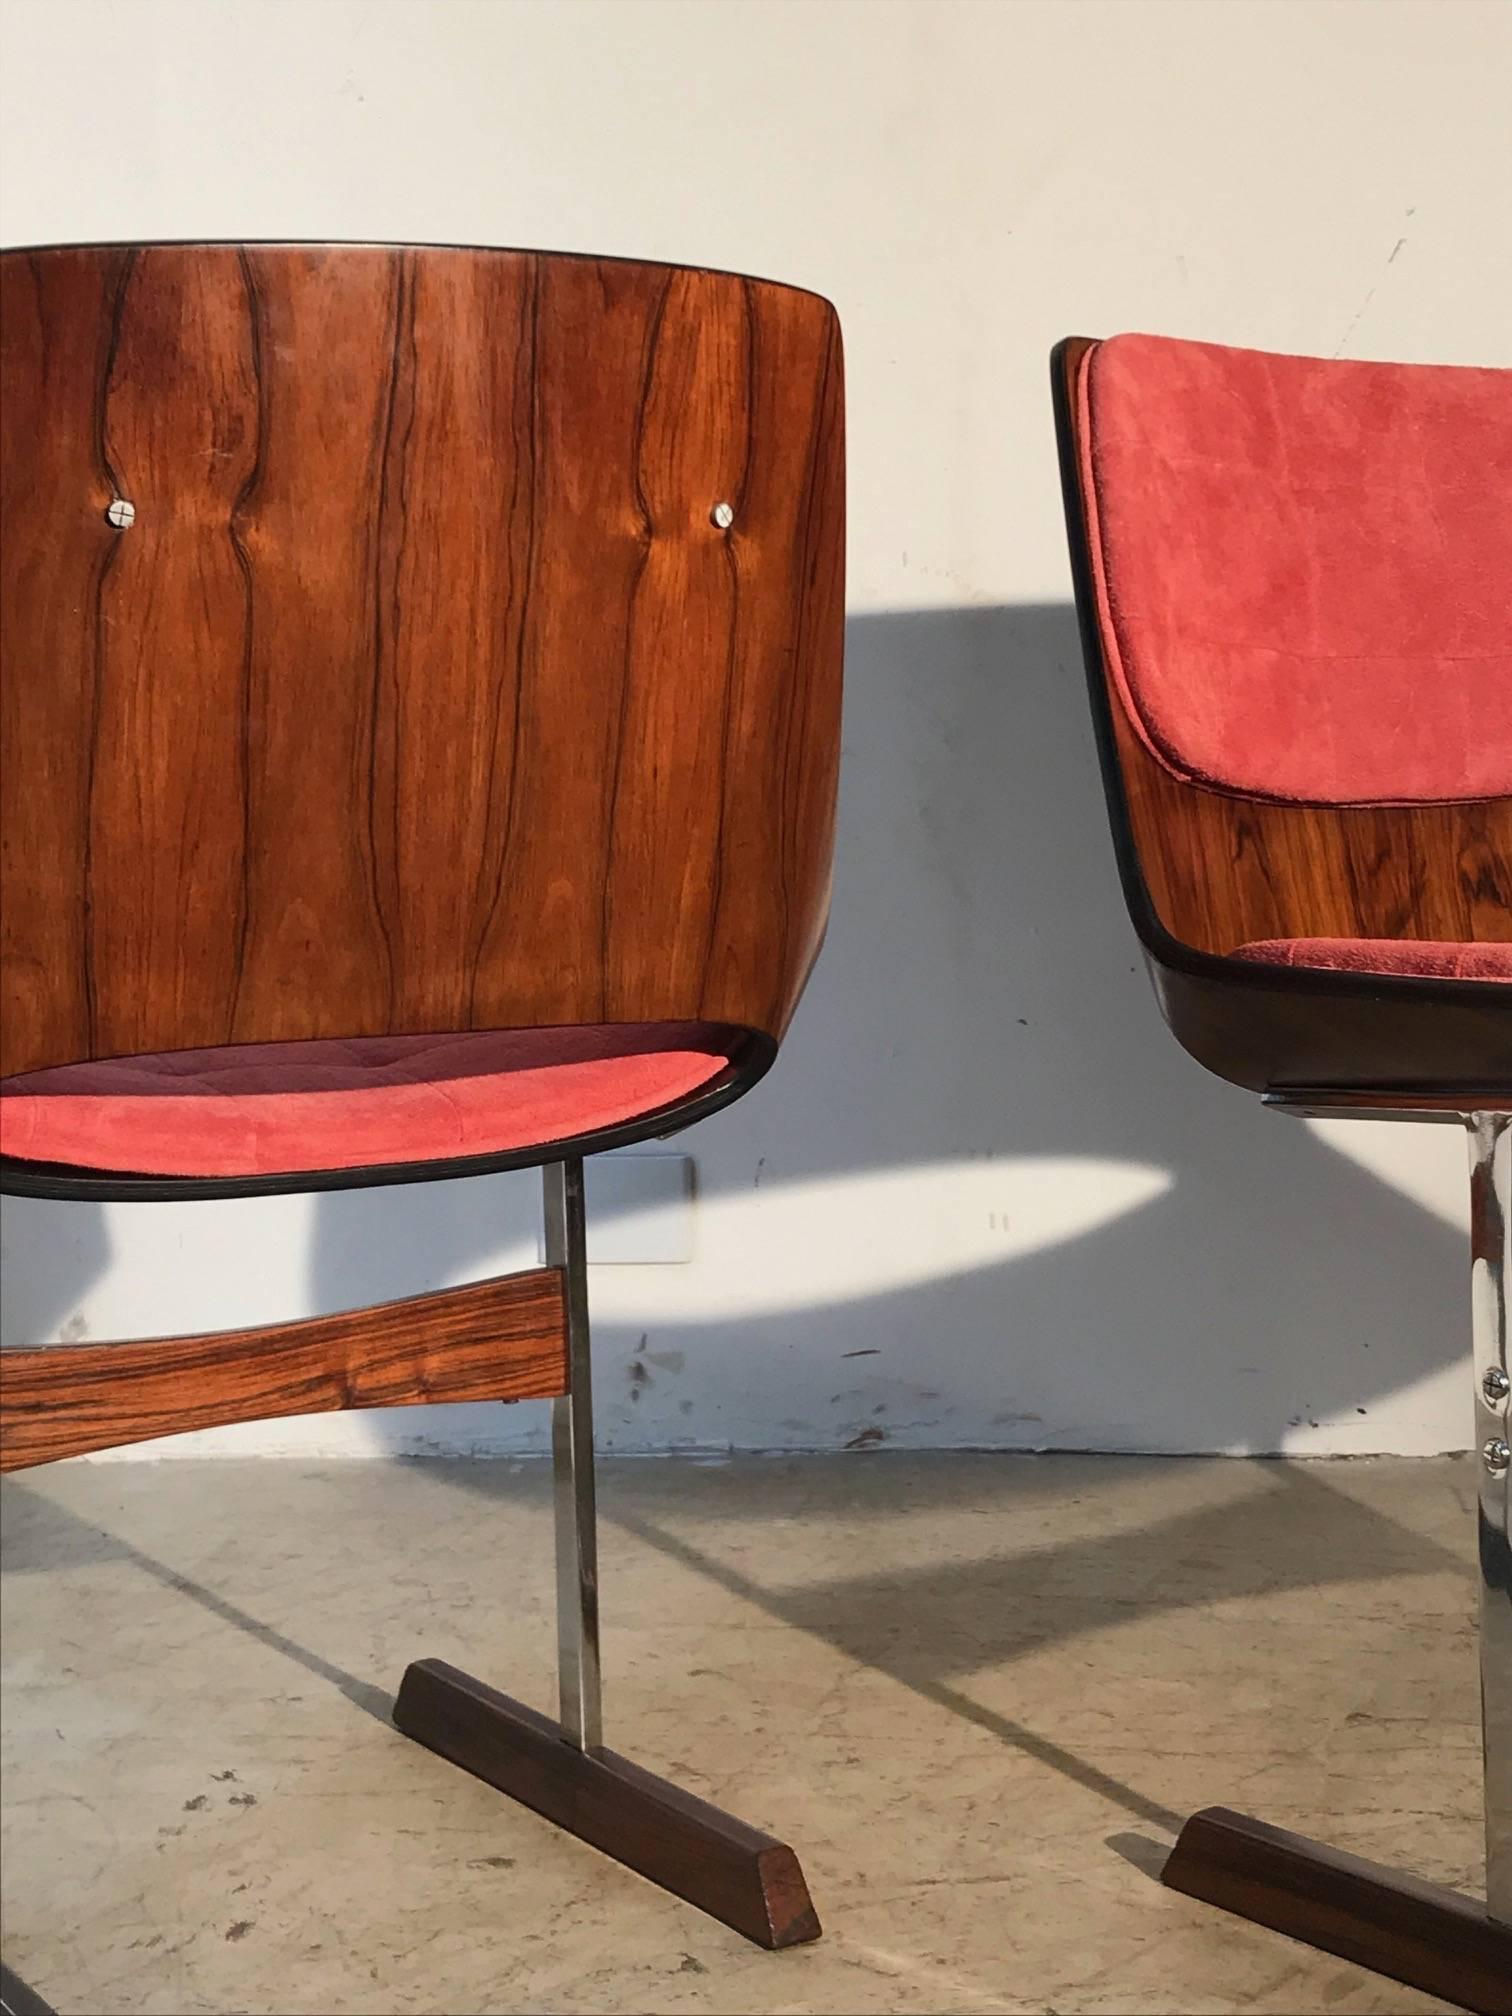 Set of ten Brazilian modern dining chairs made of rosewood with chromed metal details by Jorge Zalszupin. The legs are made of chromed metal with rosewood covering at its base. Leather upholstery covering was recently restored. Excellent restored